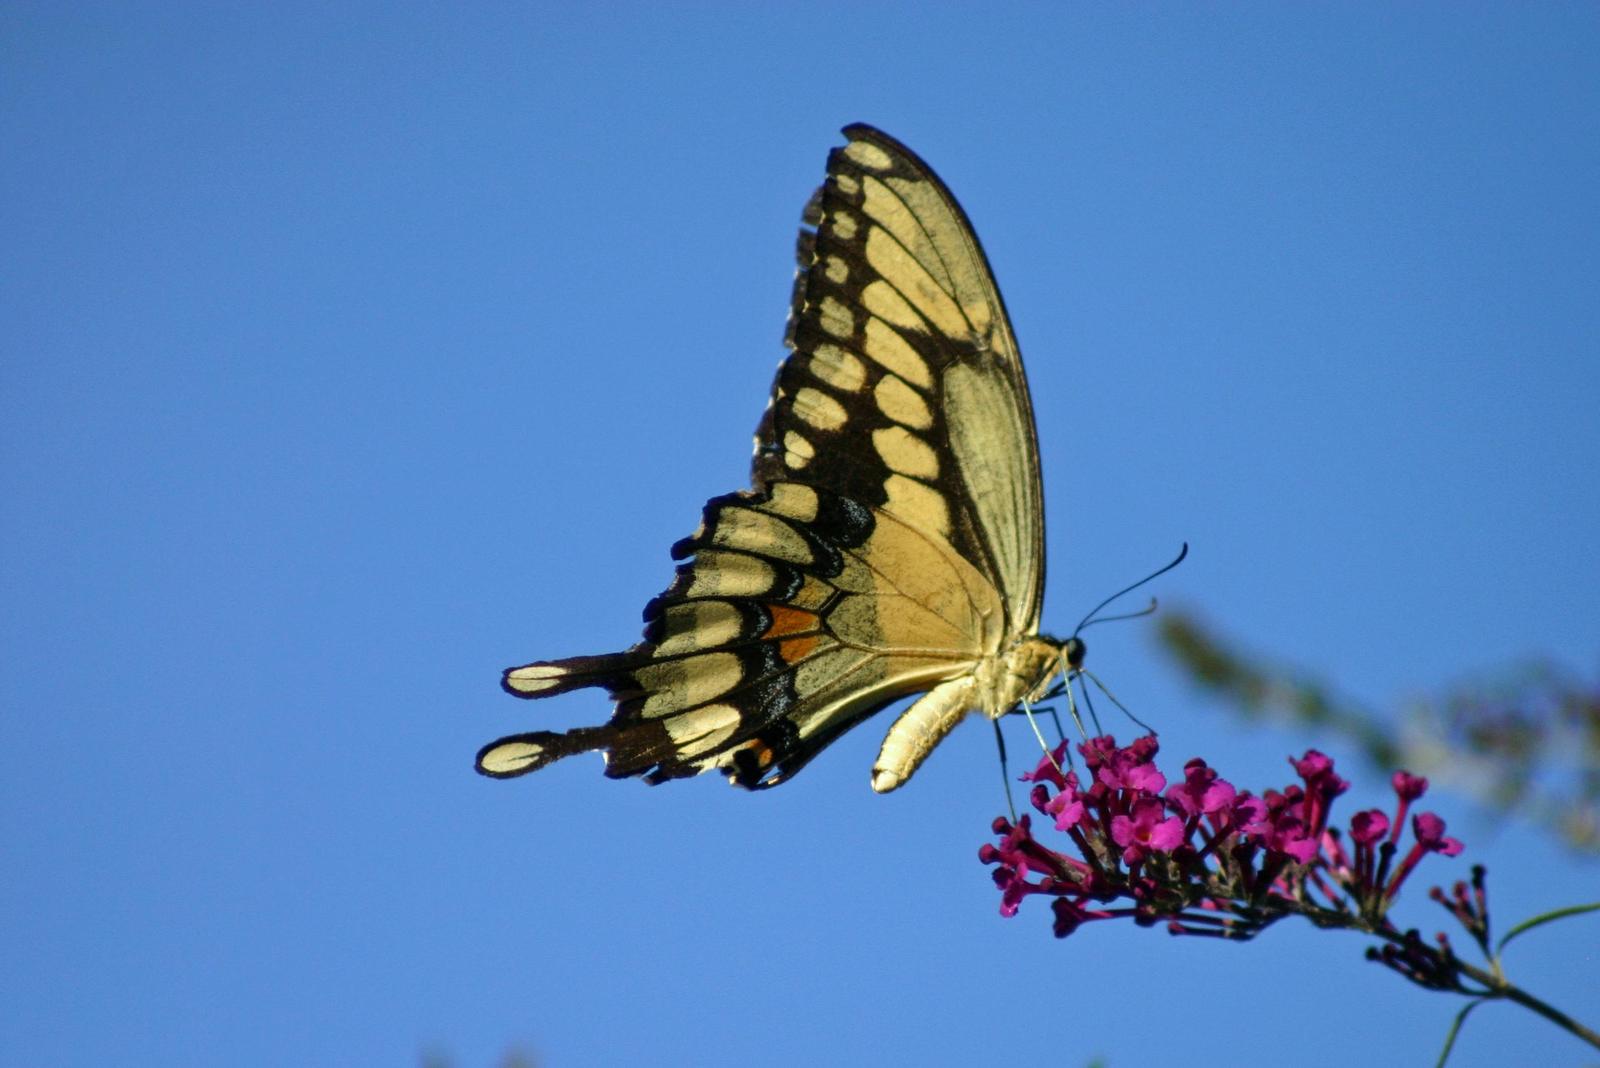 Giant Swallowtail Photo by Rob Dickerson